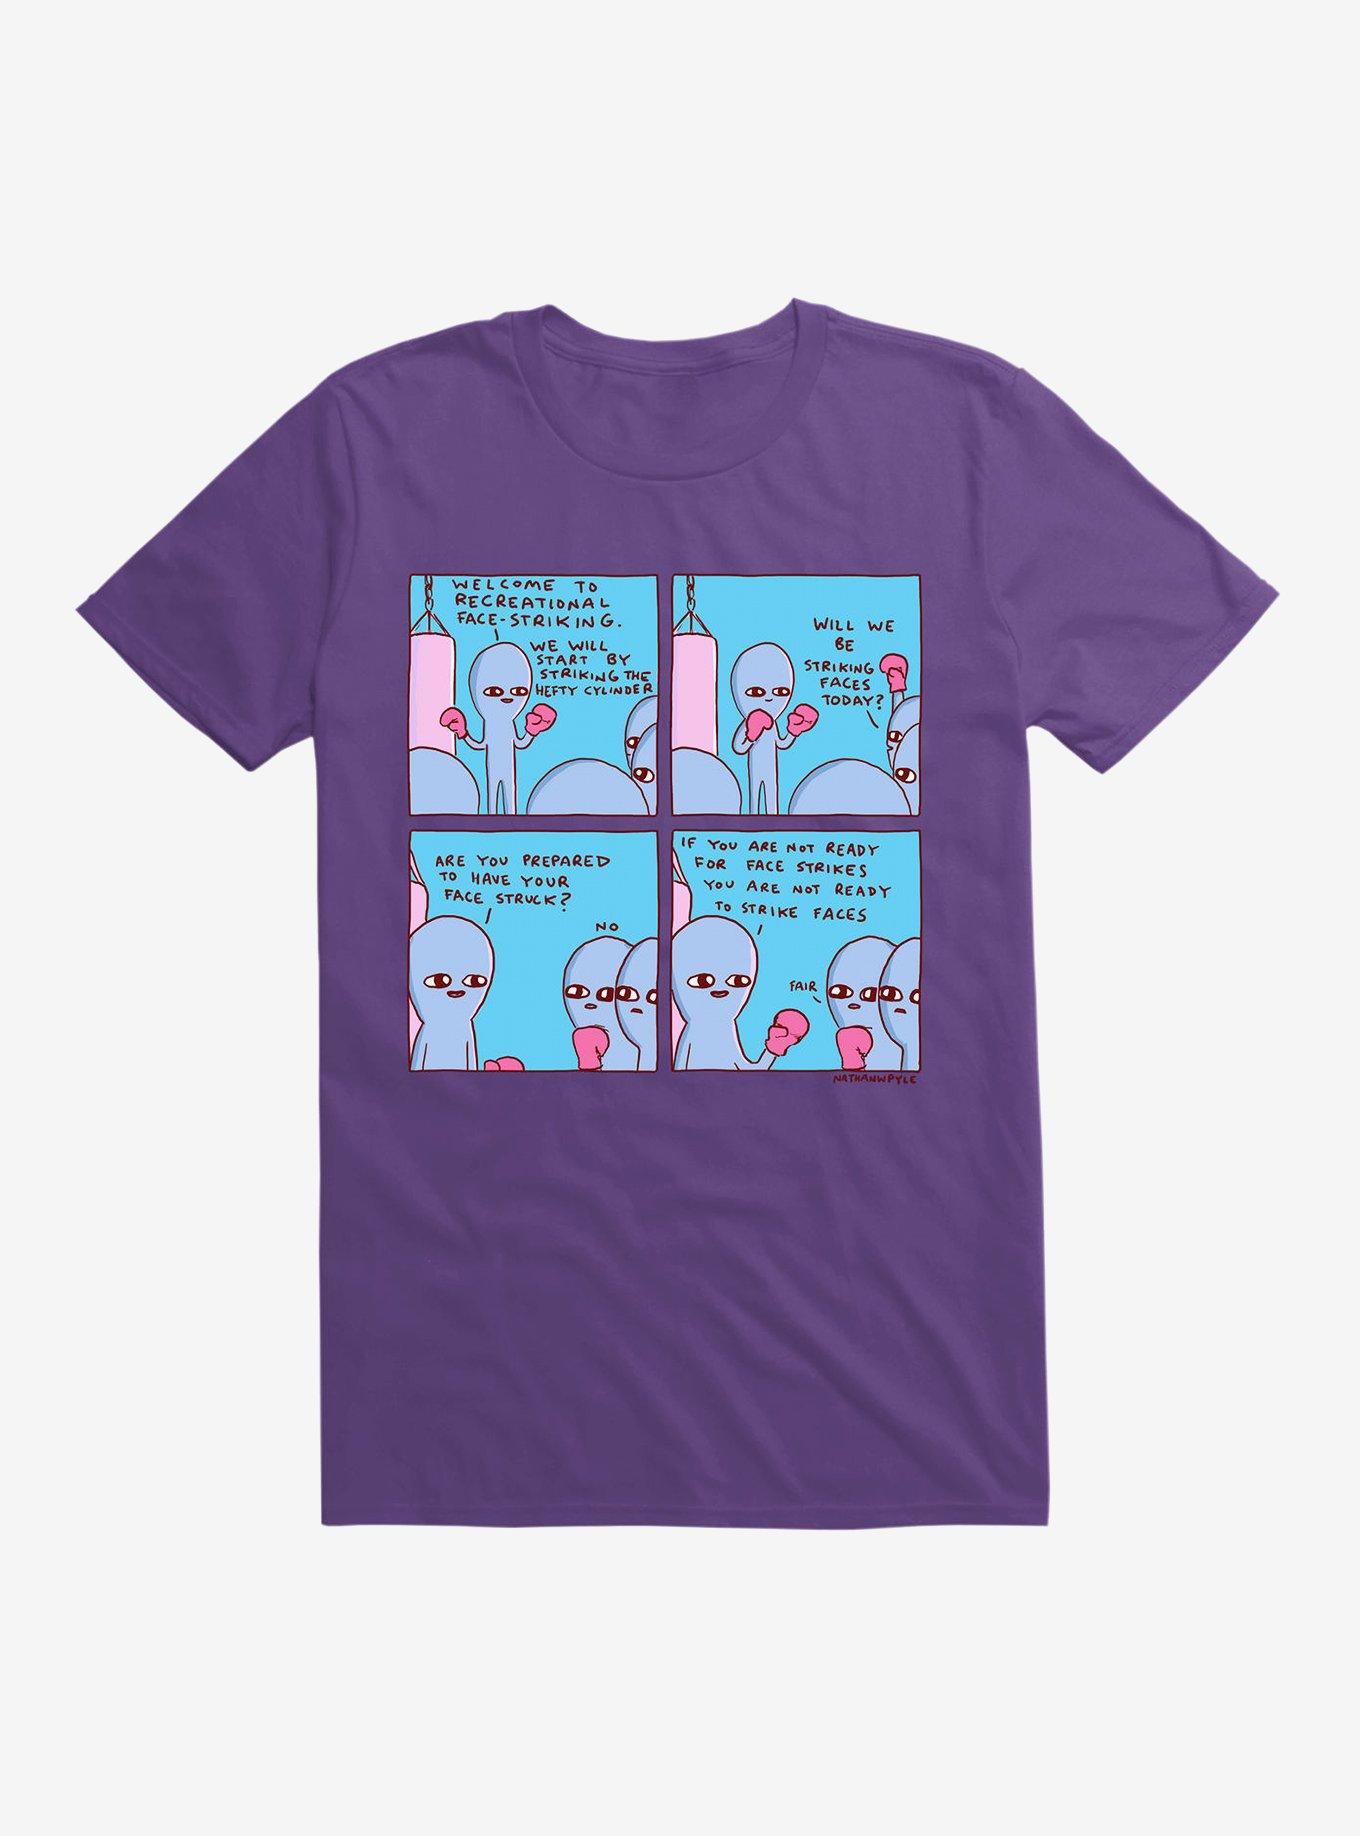 Strange Planet Will We Be Striking Faces Today? T-Shirt, PURPLE, hi-res